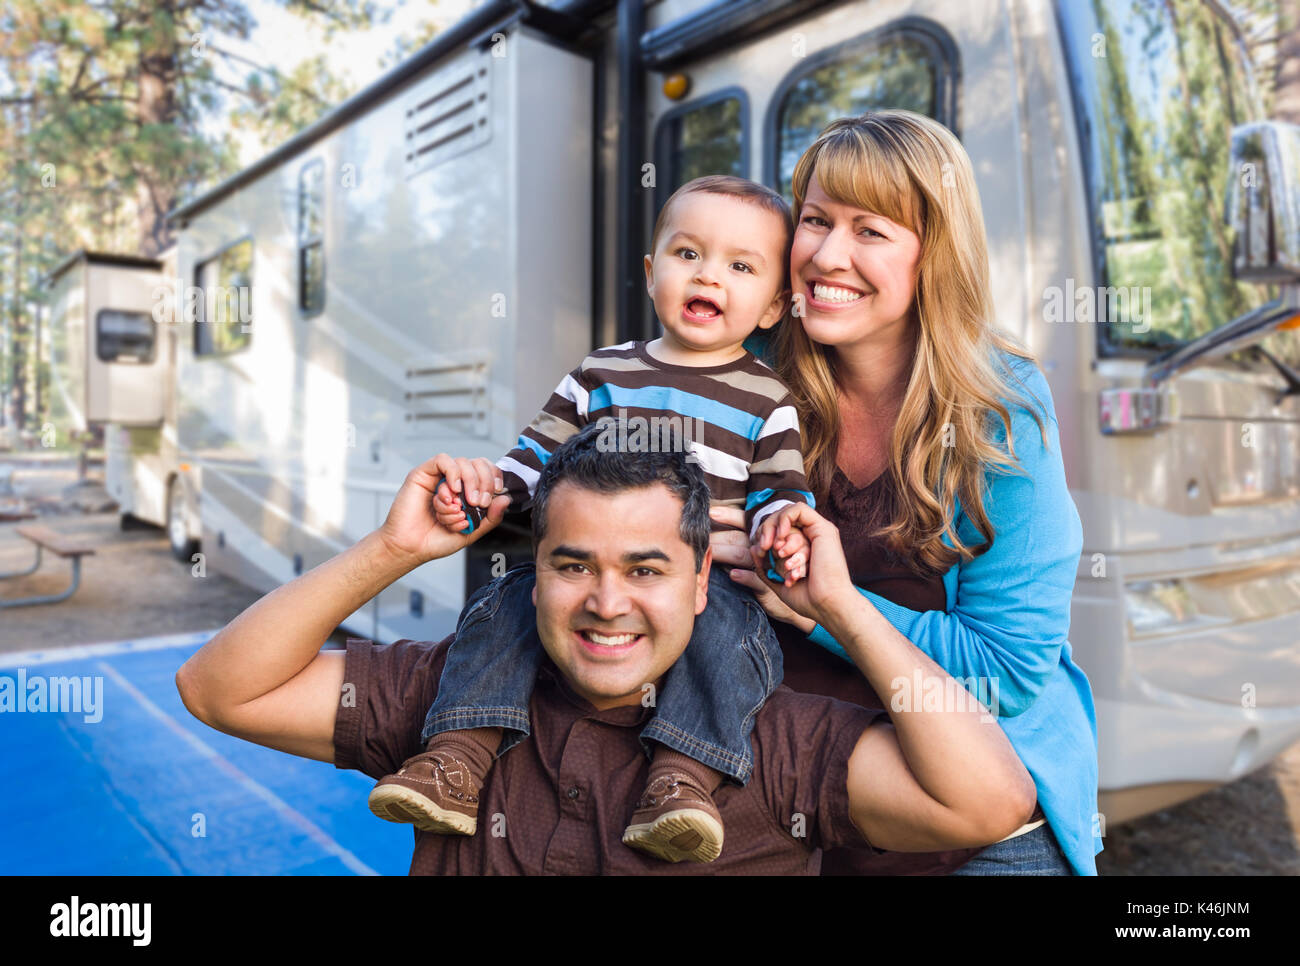 Happy Young Mixed Race Family In Front of Their Beautiful RV At The Campground. Stock Photo